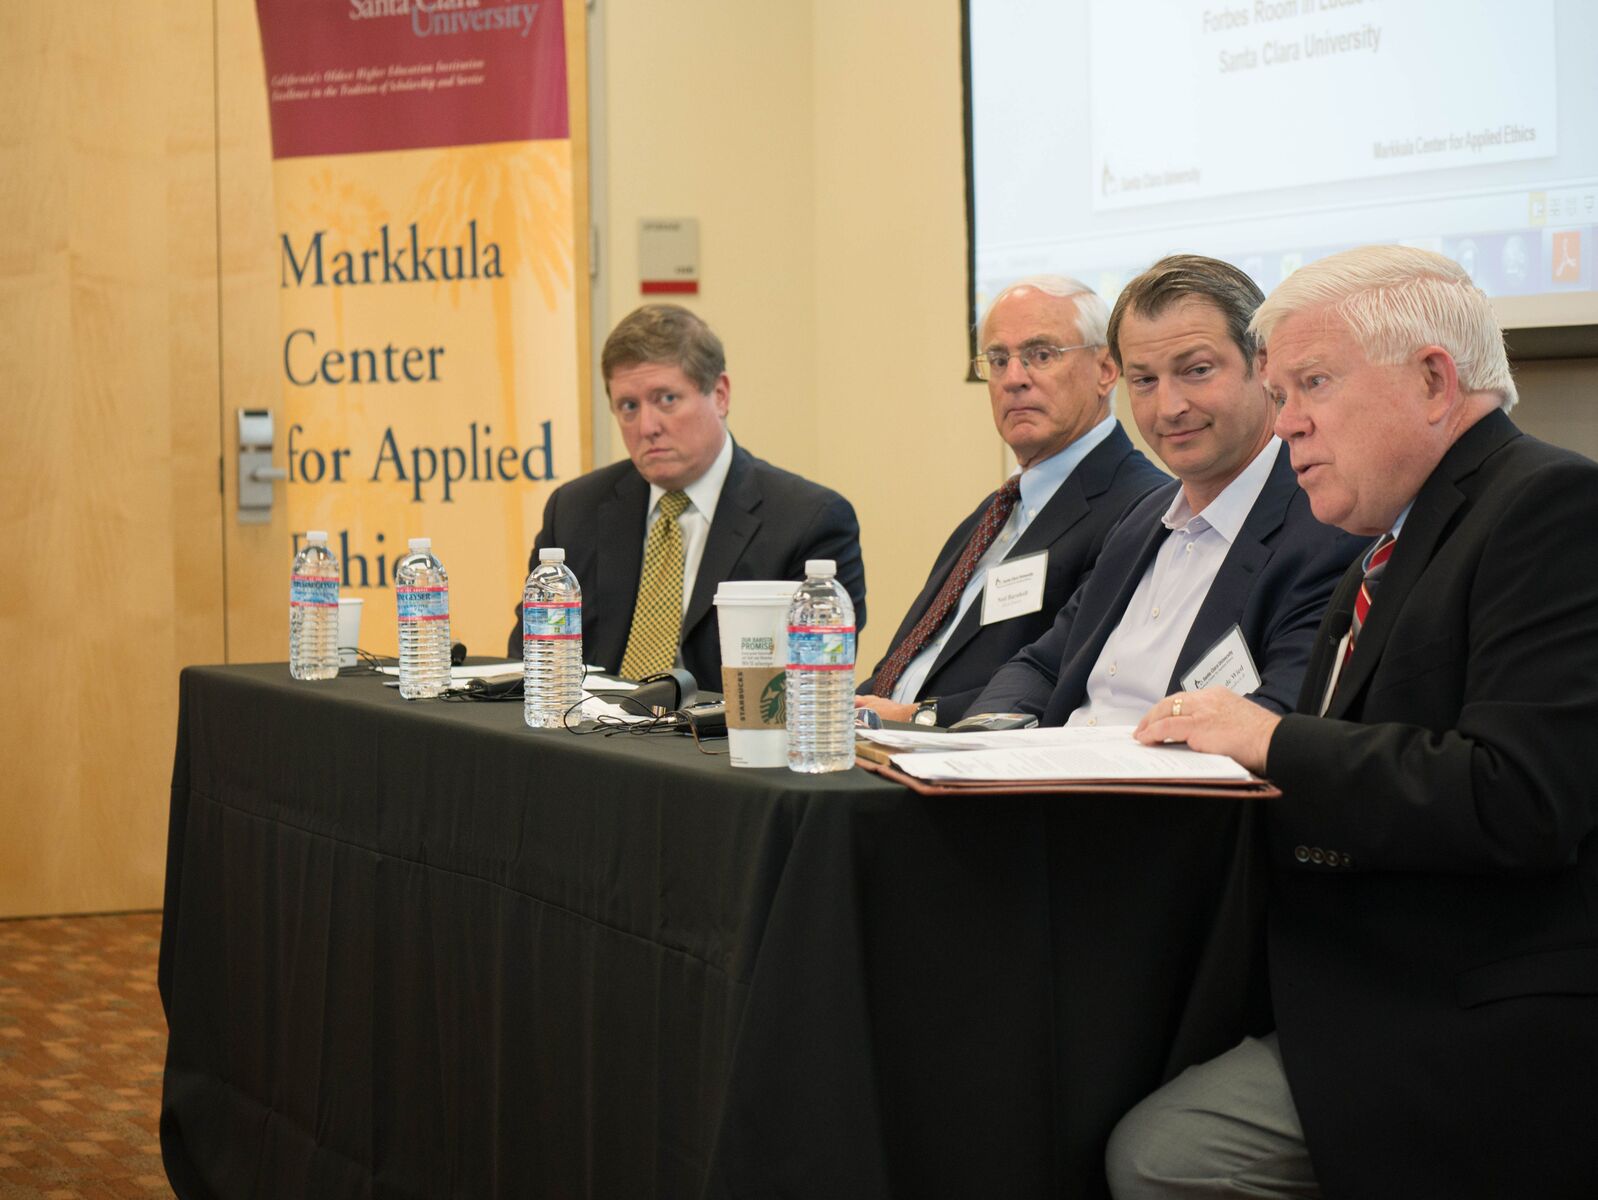 Four men seated at a panel discussion with a banner in the background.